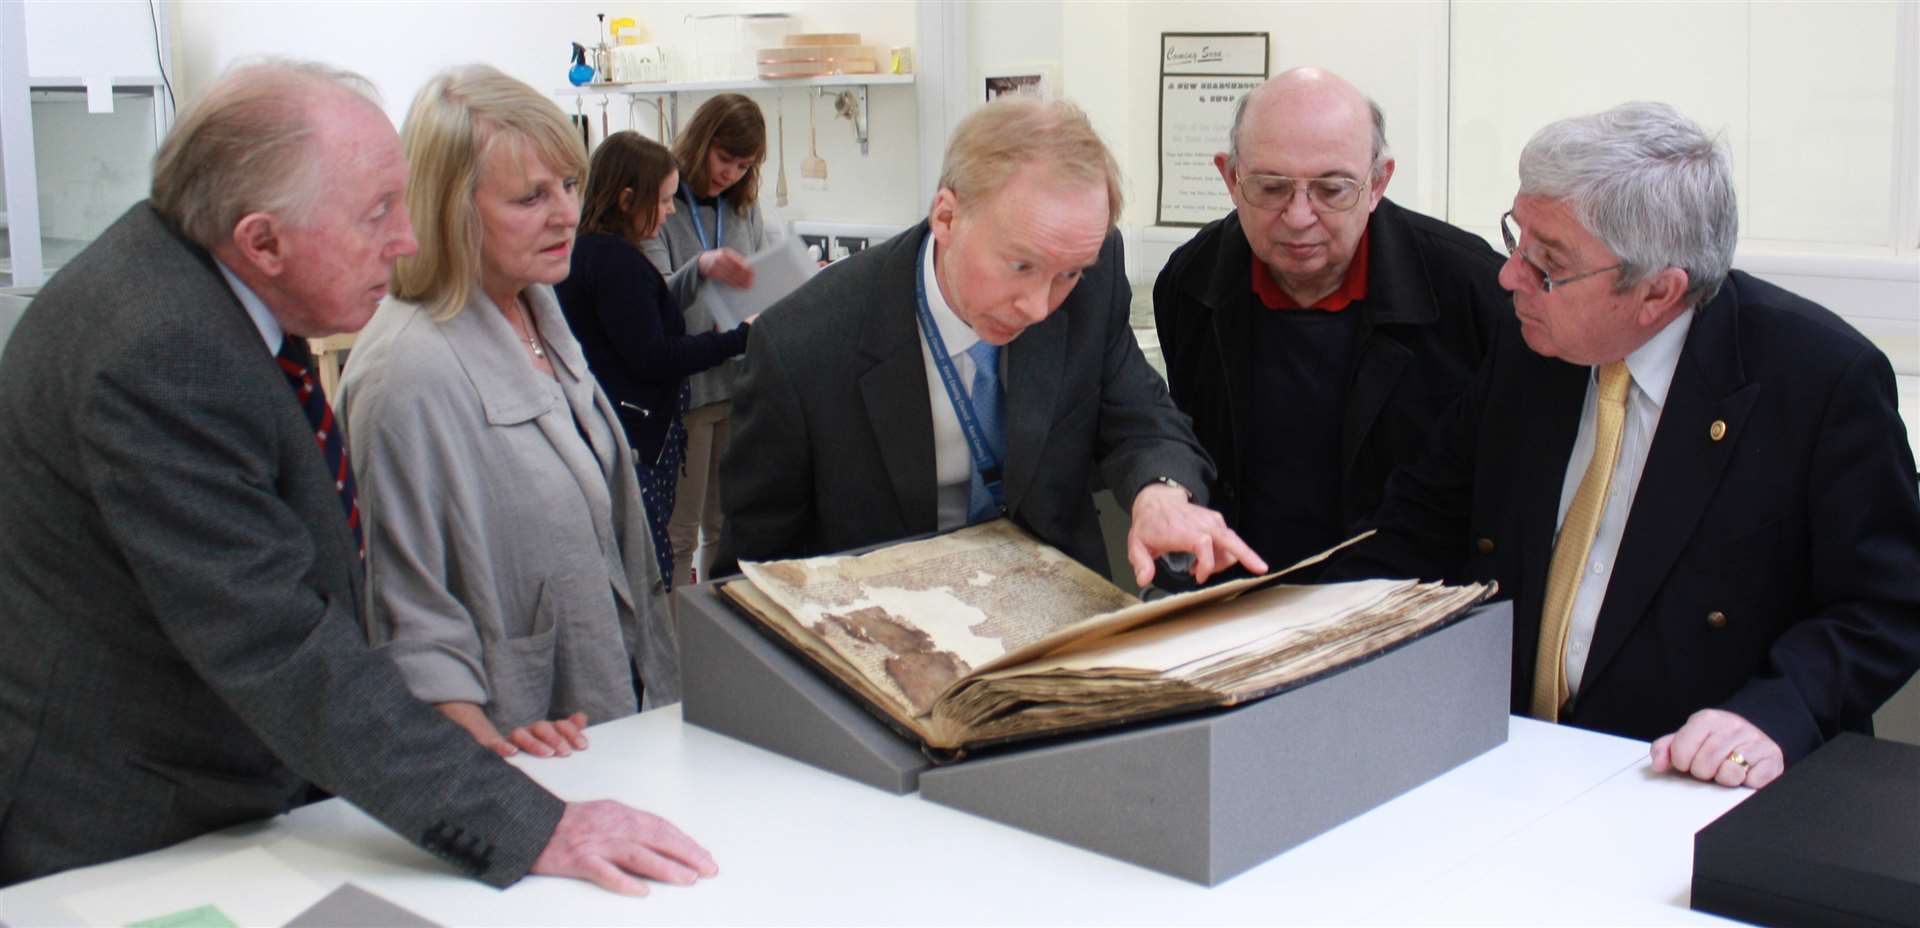 Examining the document: Cllr John Bragg, Cllr Pip Russell, Dr Mark Bateson, museum archivist Ray Harlow and Mayor of Sandwich, Cllr Paul Graeme